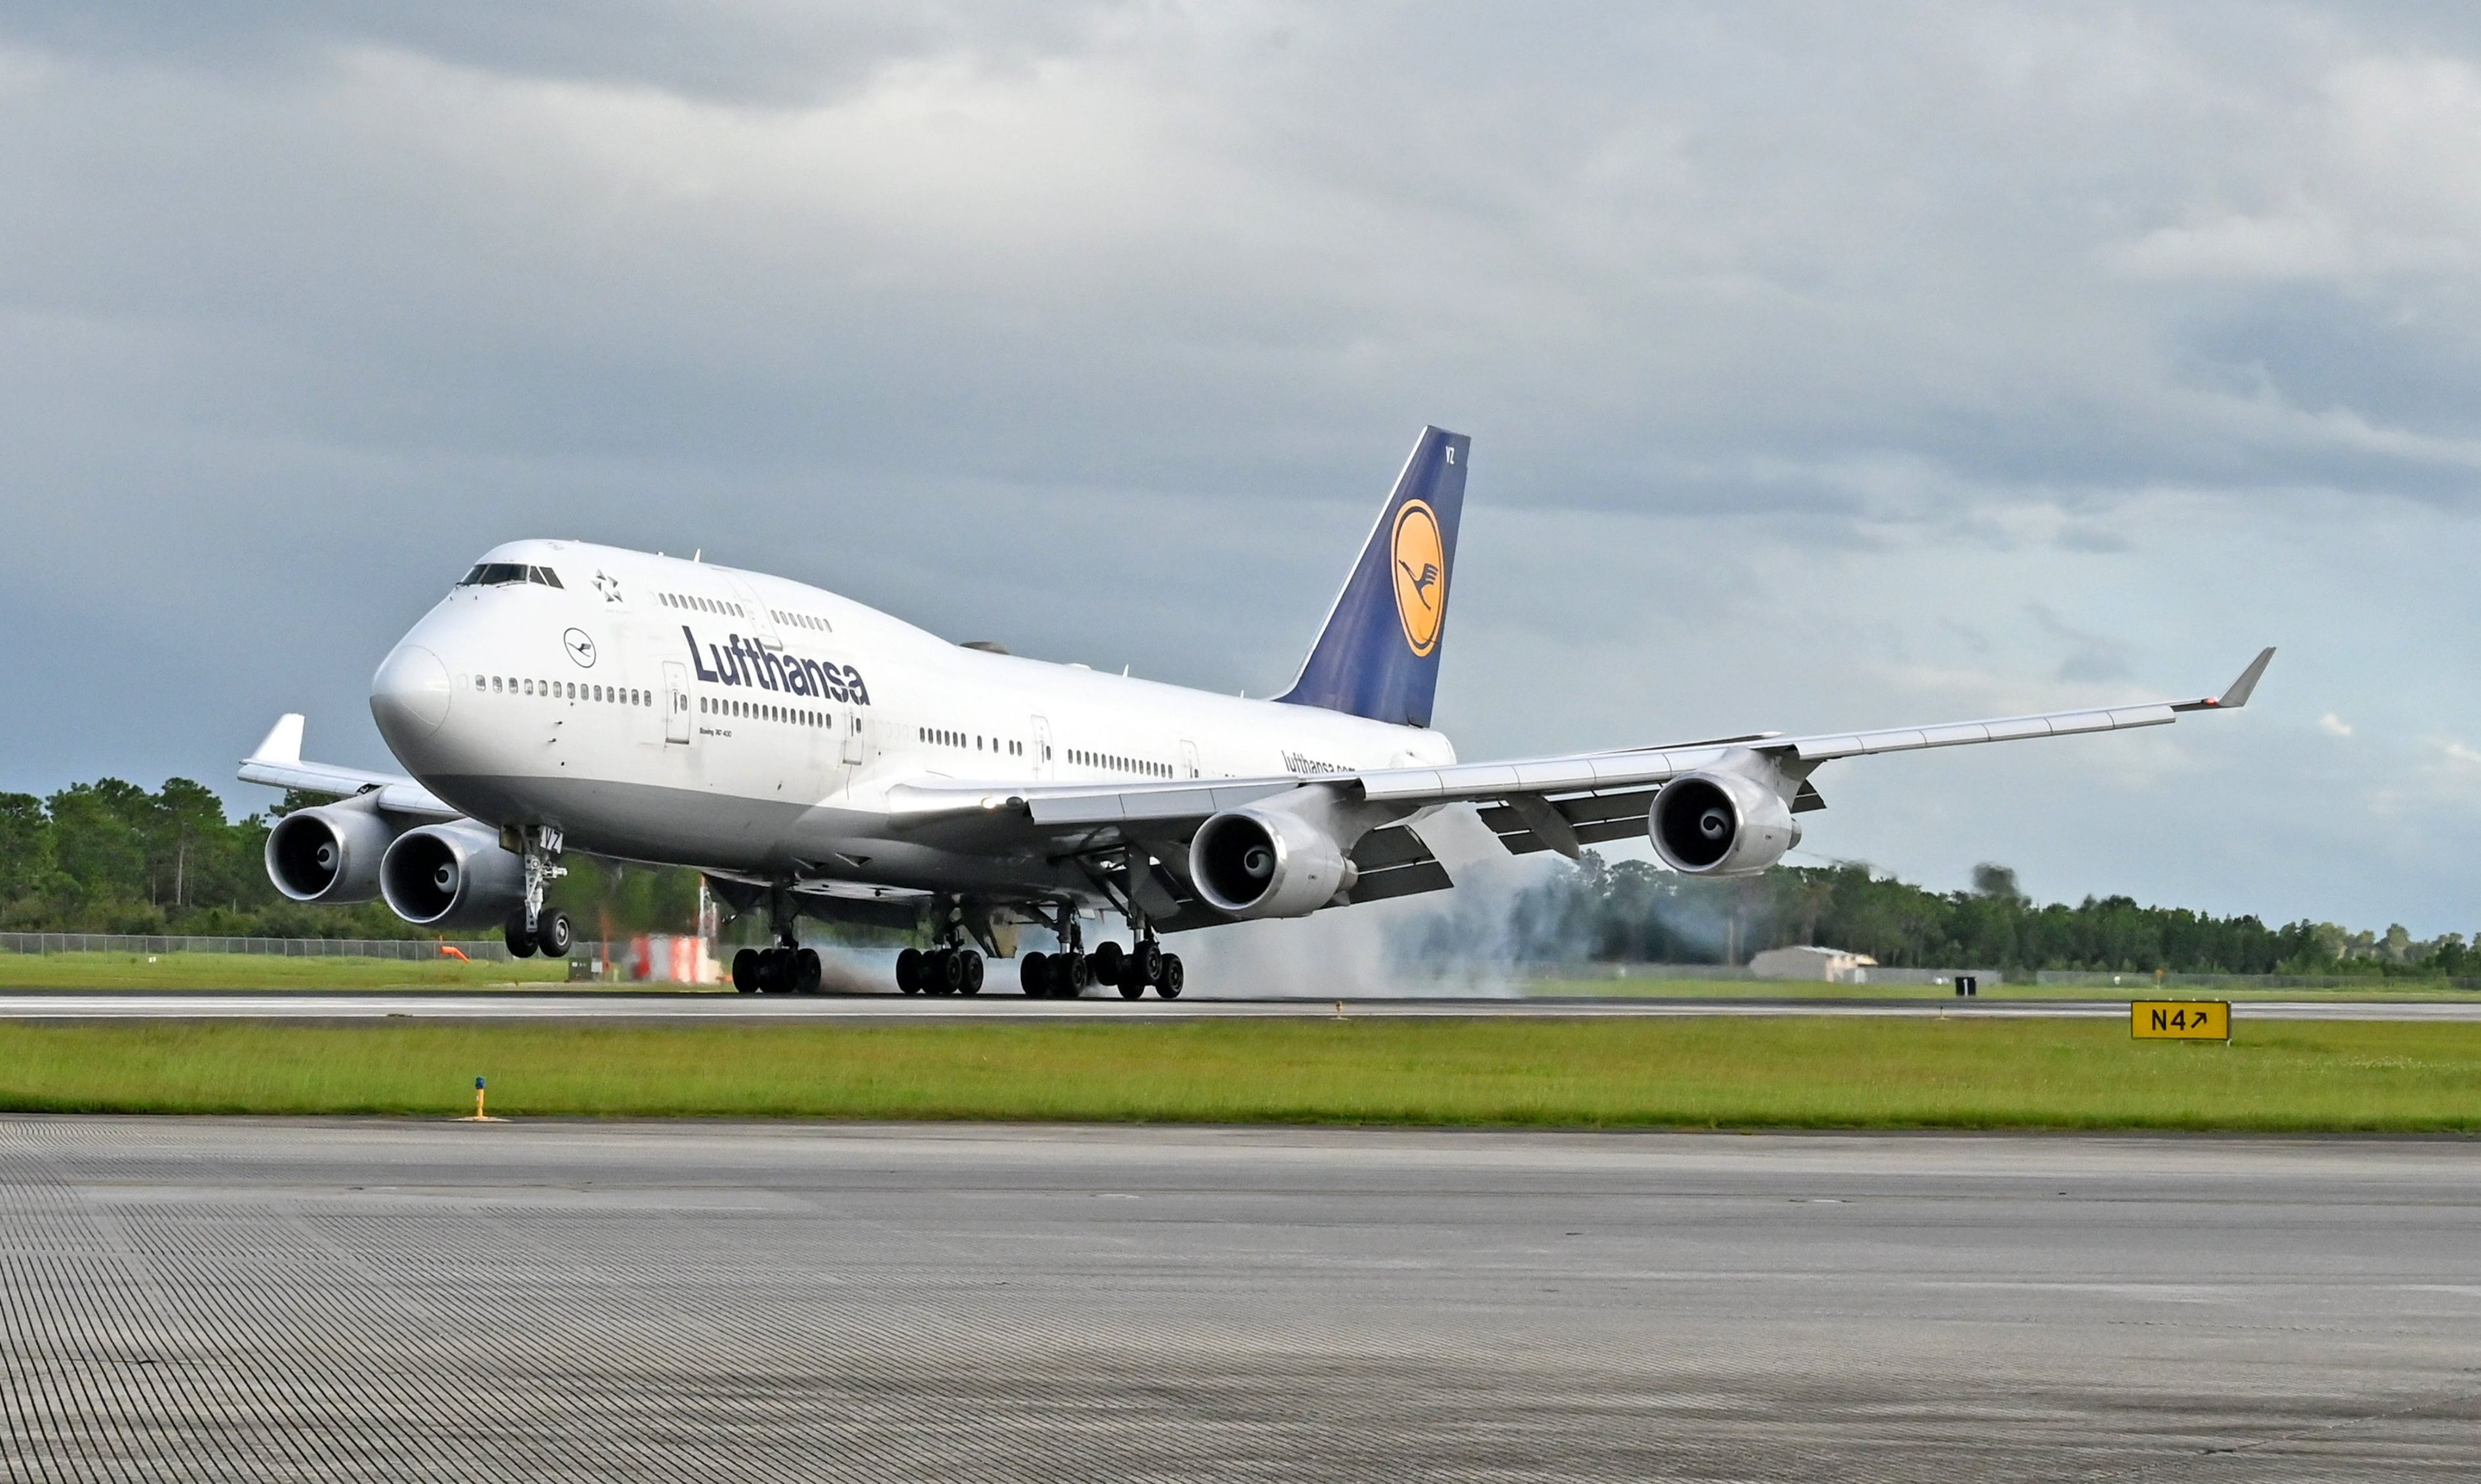 Lufthansa's Queen: Where The Boeing 747-400 Is Flying This Week